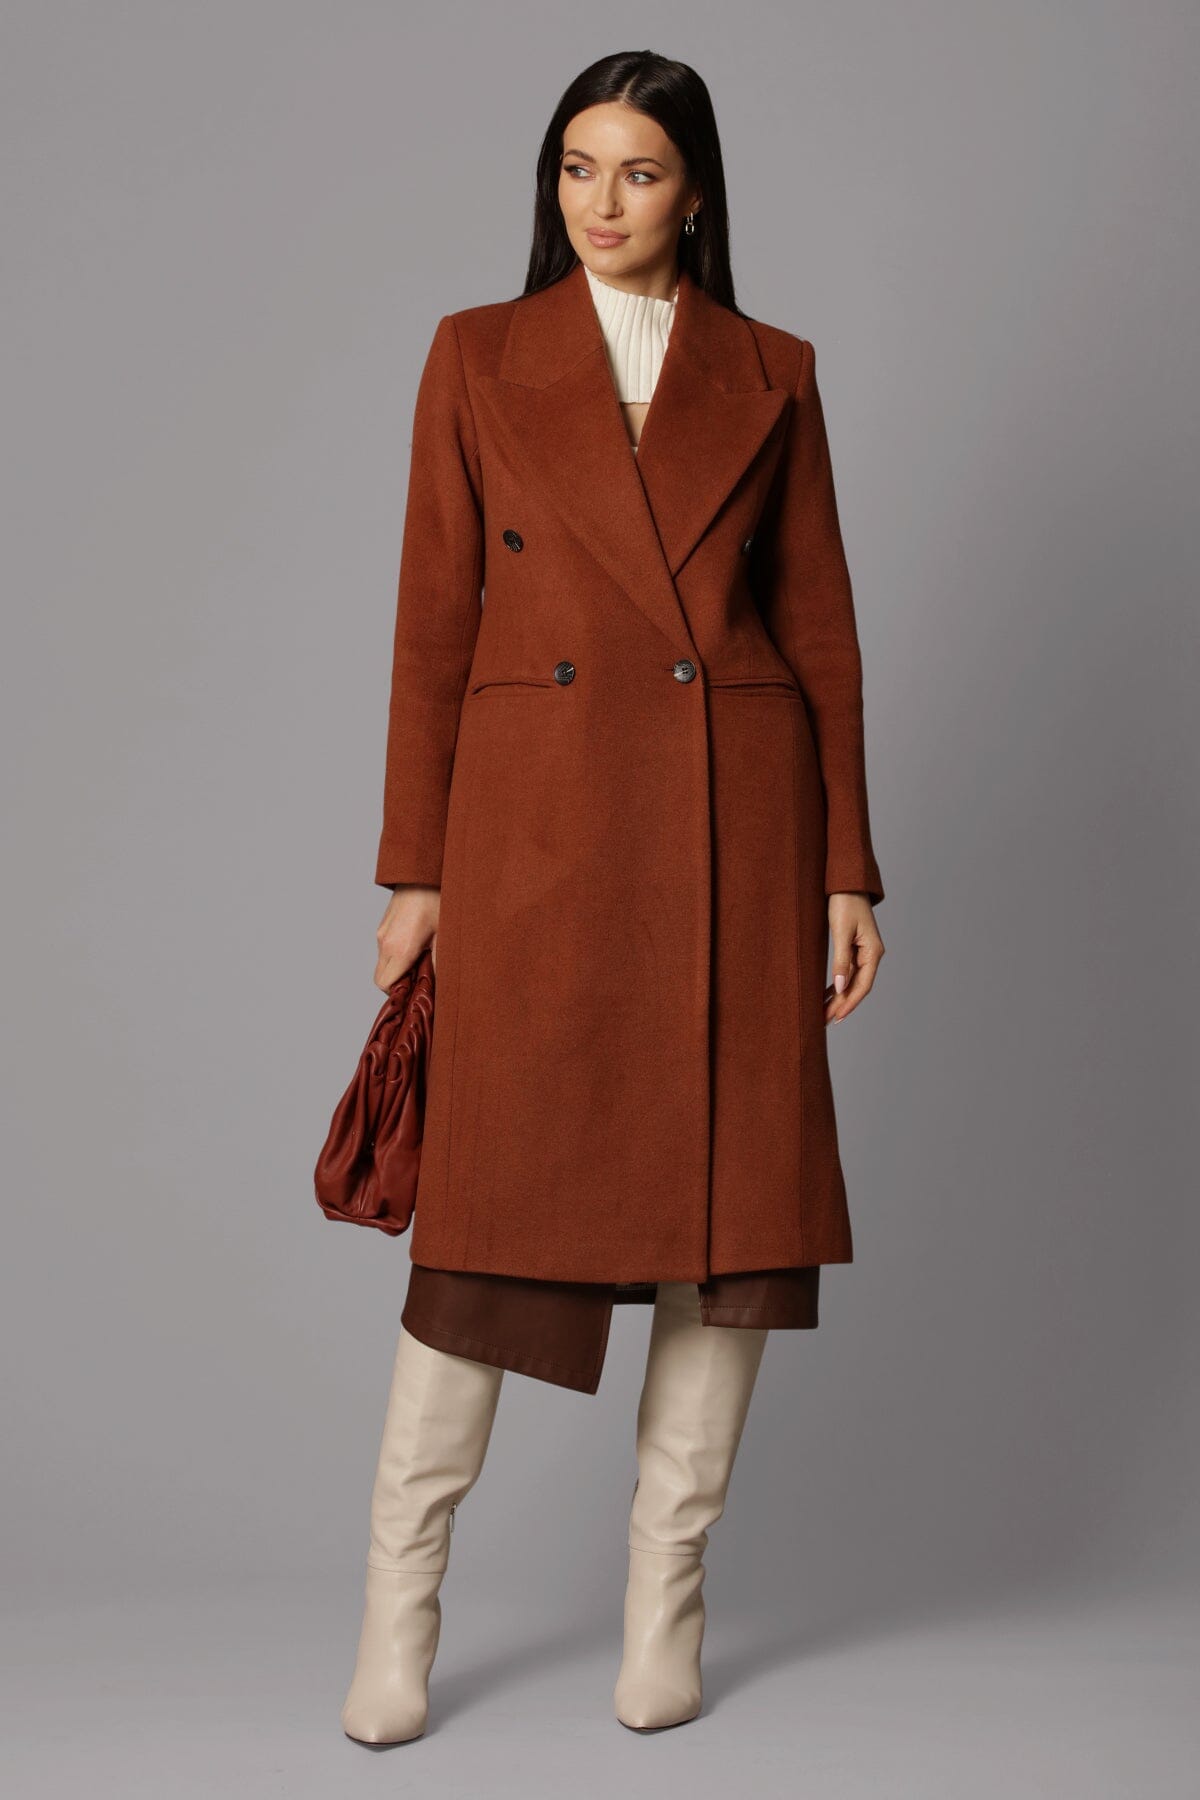 Cinnamon brown tailored double-breasted long coat by Avec Les Filles Coats & Jackets